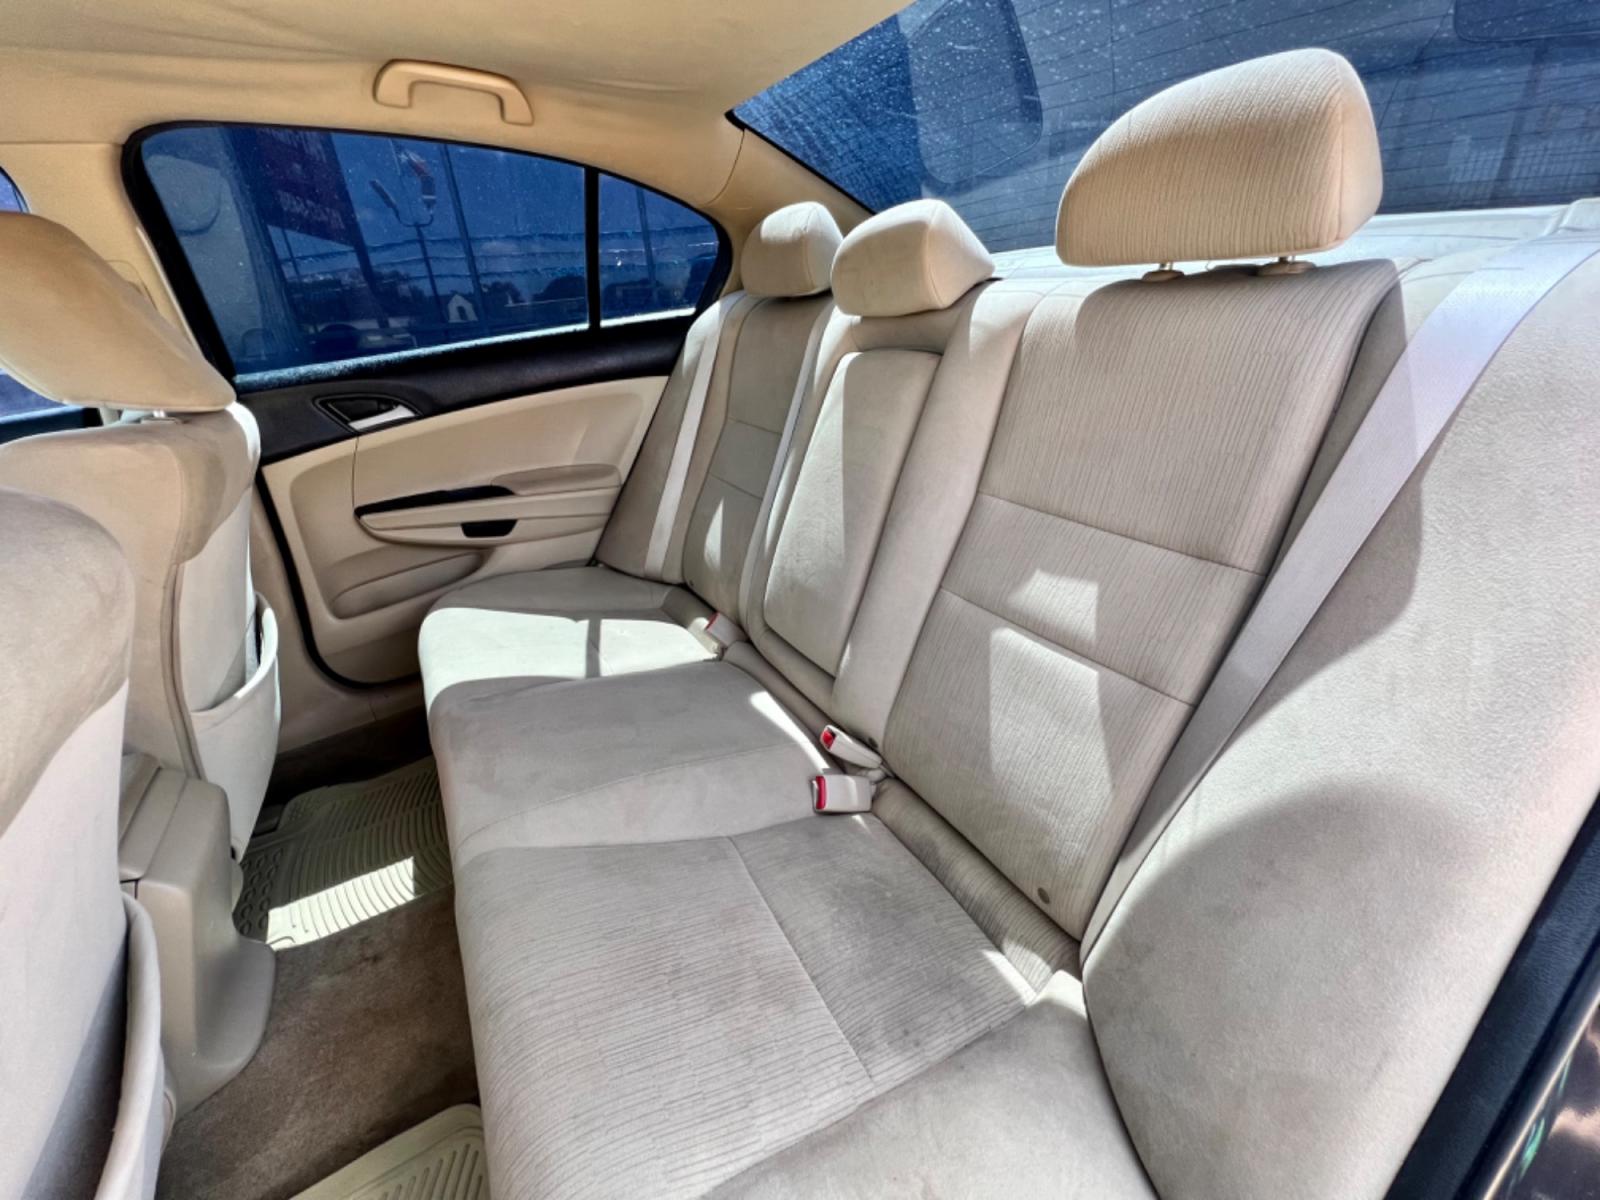 2011 GRAY HONDA ACCORD LX (1HGCP2F38BA) , located at 5900 E. Lancaster Ave., Fort Worth, TX, 76112, (817) 457-5456, 0.000000, 0.000000 - This is a 2011 HONDA ACCORD LX 4 DOOR SEDAN that is in excellent condition. There are no dents or scratches. The interior is clean with no rips or tears or stains. All power windows, door locks and seats. Ice cold AC for those hot Texas summer days. It is equipped with a CD player, AM/FM radio, AUX - Photo #12